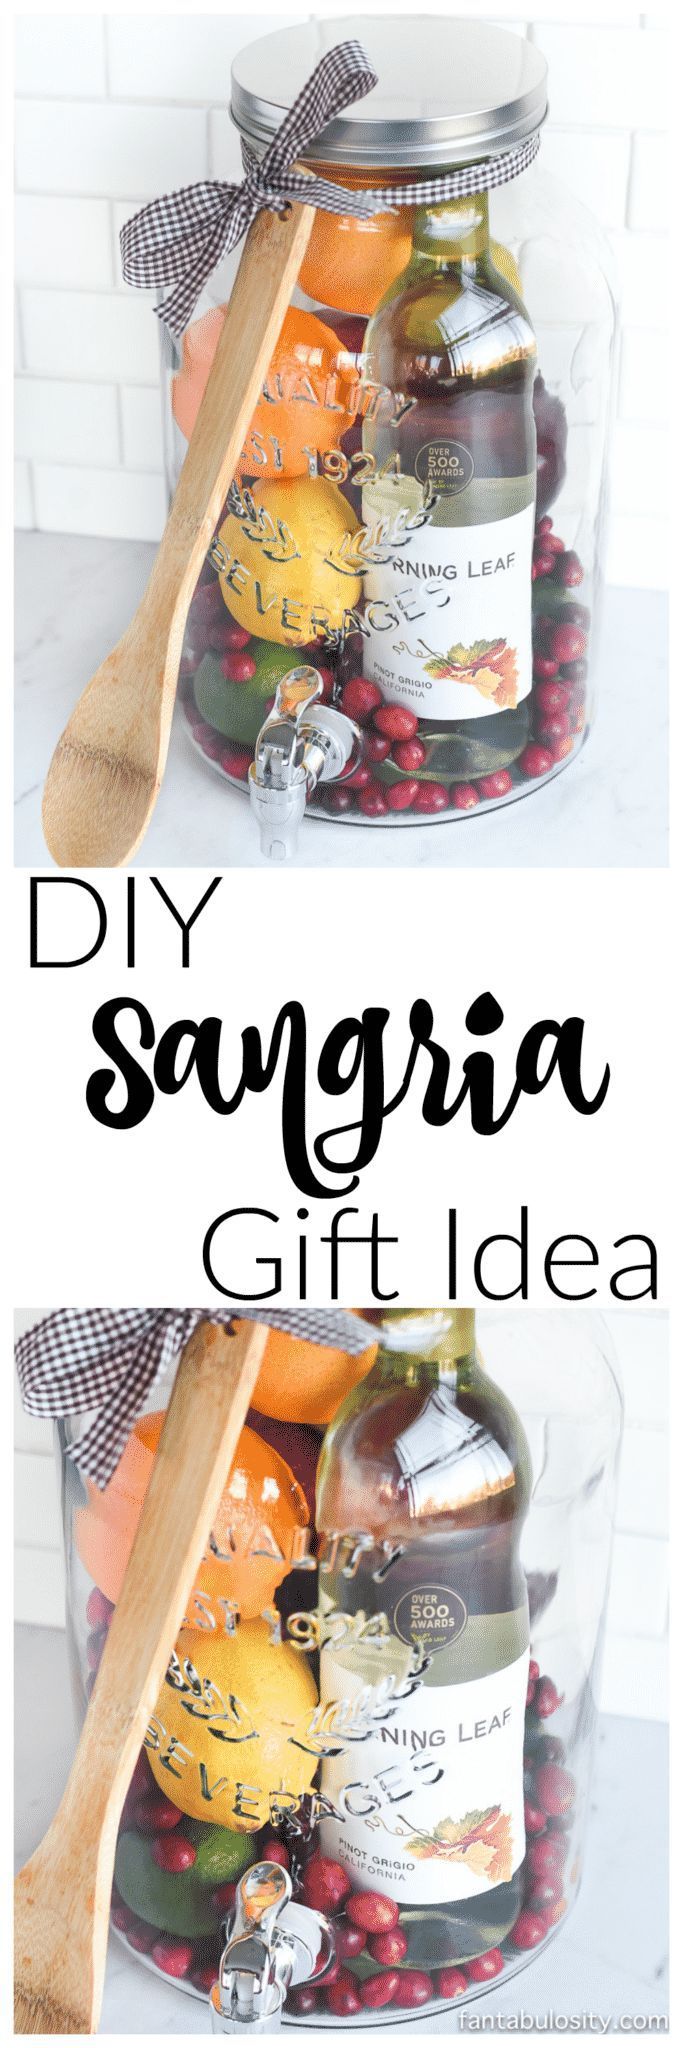 diy Gifts for friends